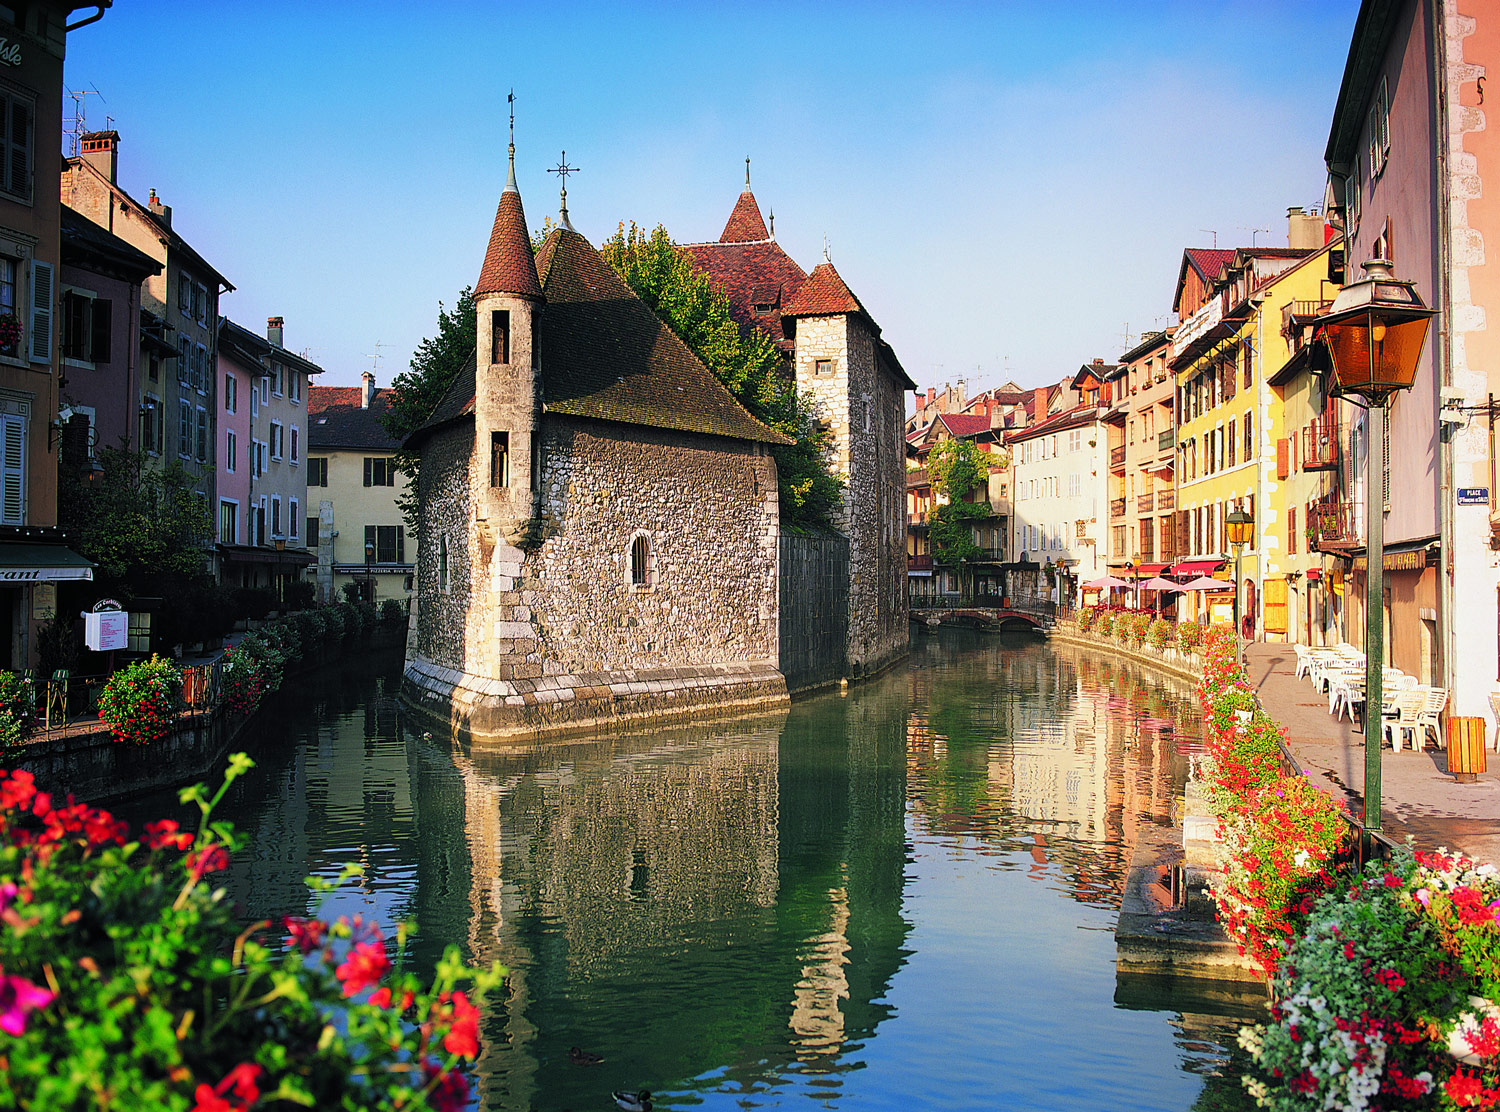 annecy - photo #7